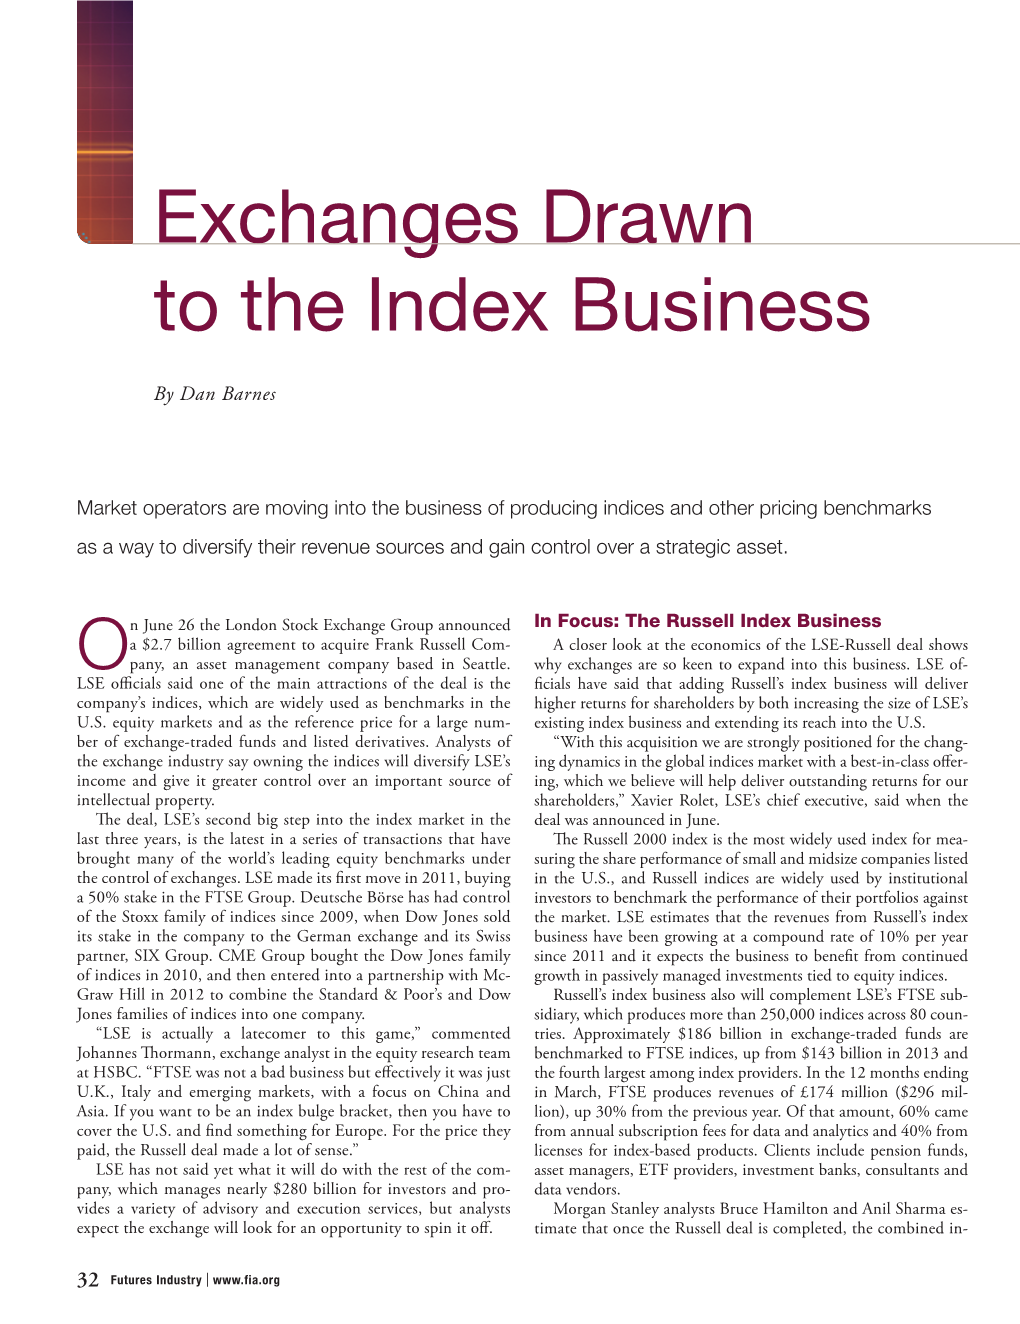 Exchanges Drawn to the Index Business